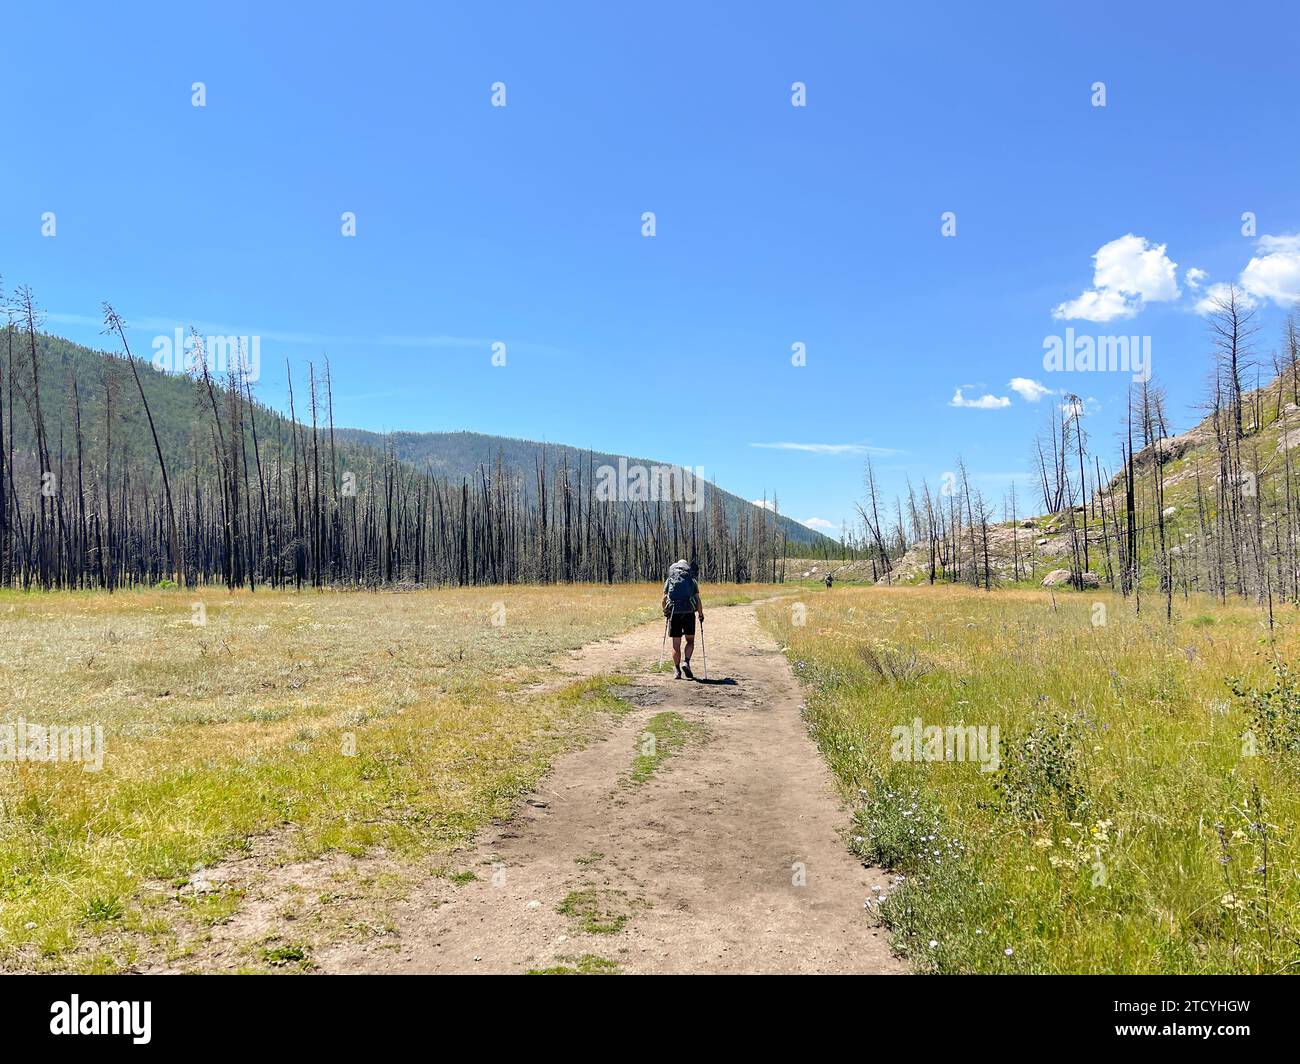 A lone hiker treks through the regenerating landscape of Rocky Mountain National Park. Stock Photo